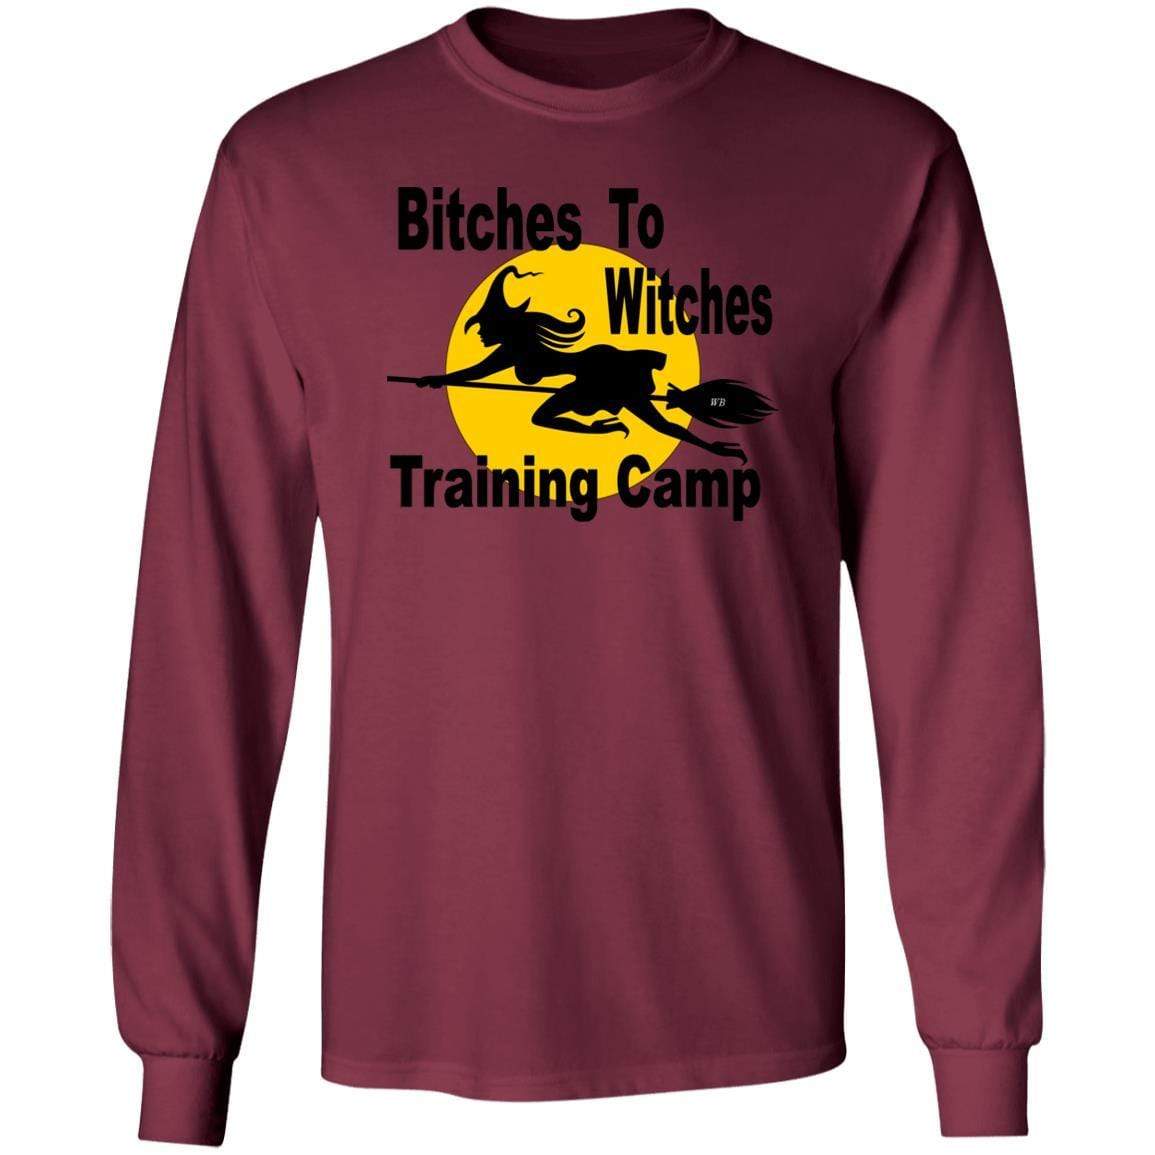 T-Shirts Maroon / S WineyBitches.Co "Bitches To Witches Training Camp" LS Ultra Cotton T-Shirt WineyBitchesCo